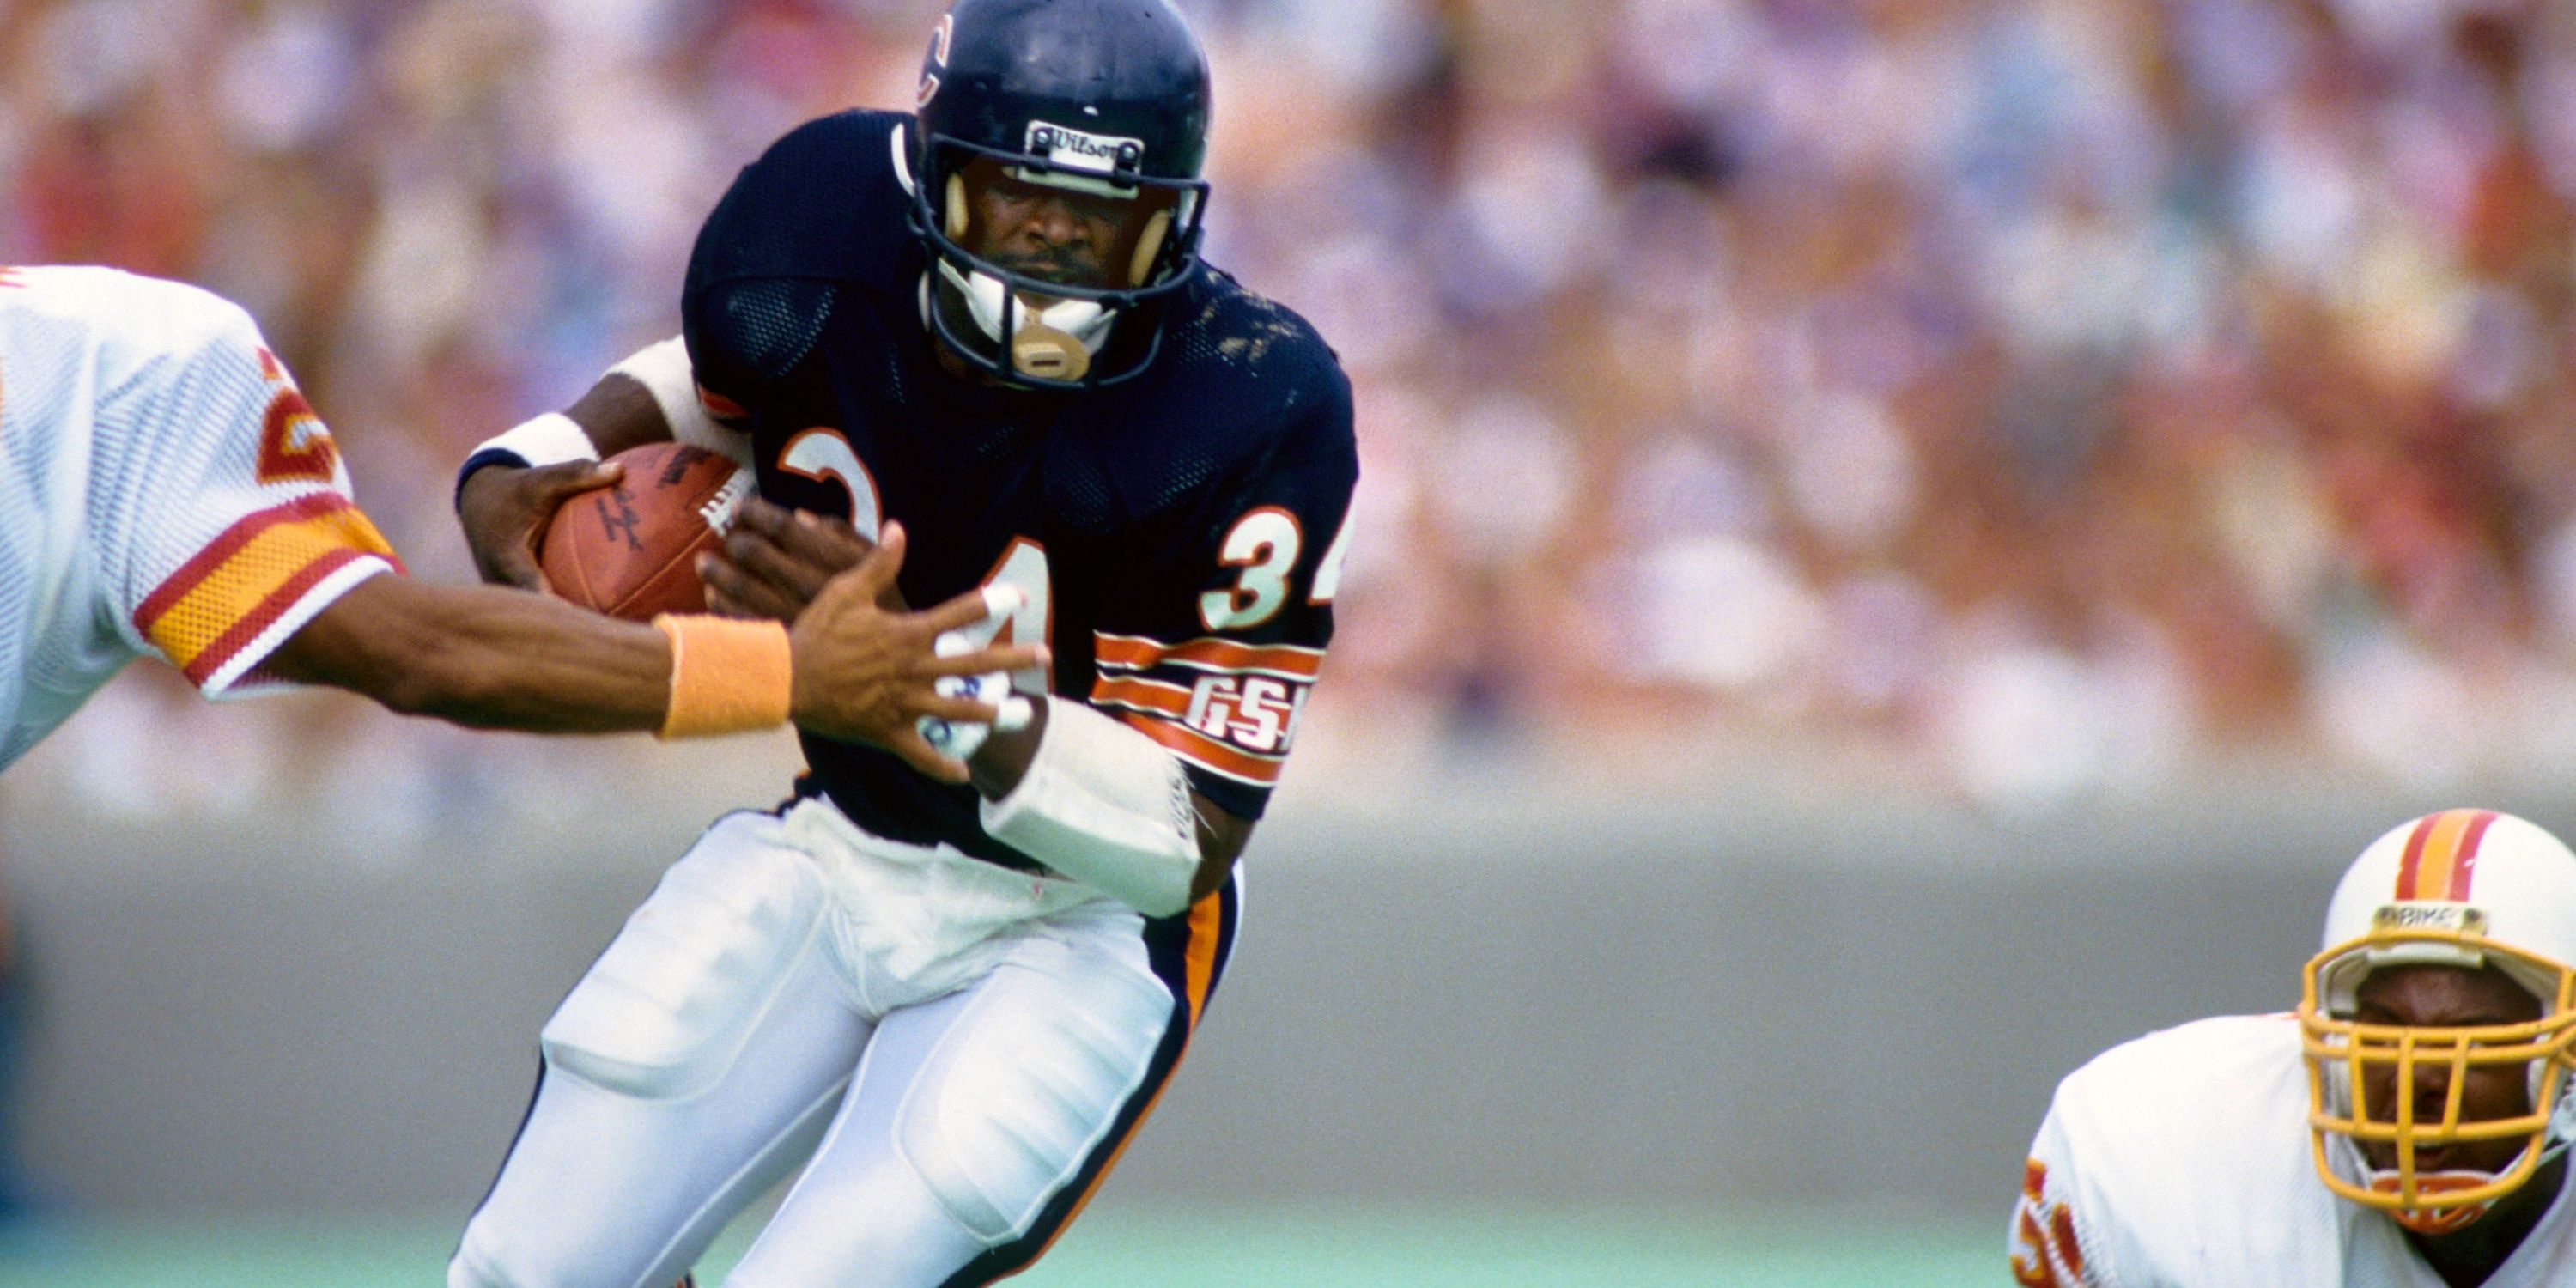 Walter Payton, Chicago Bears all-time great running back